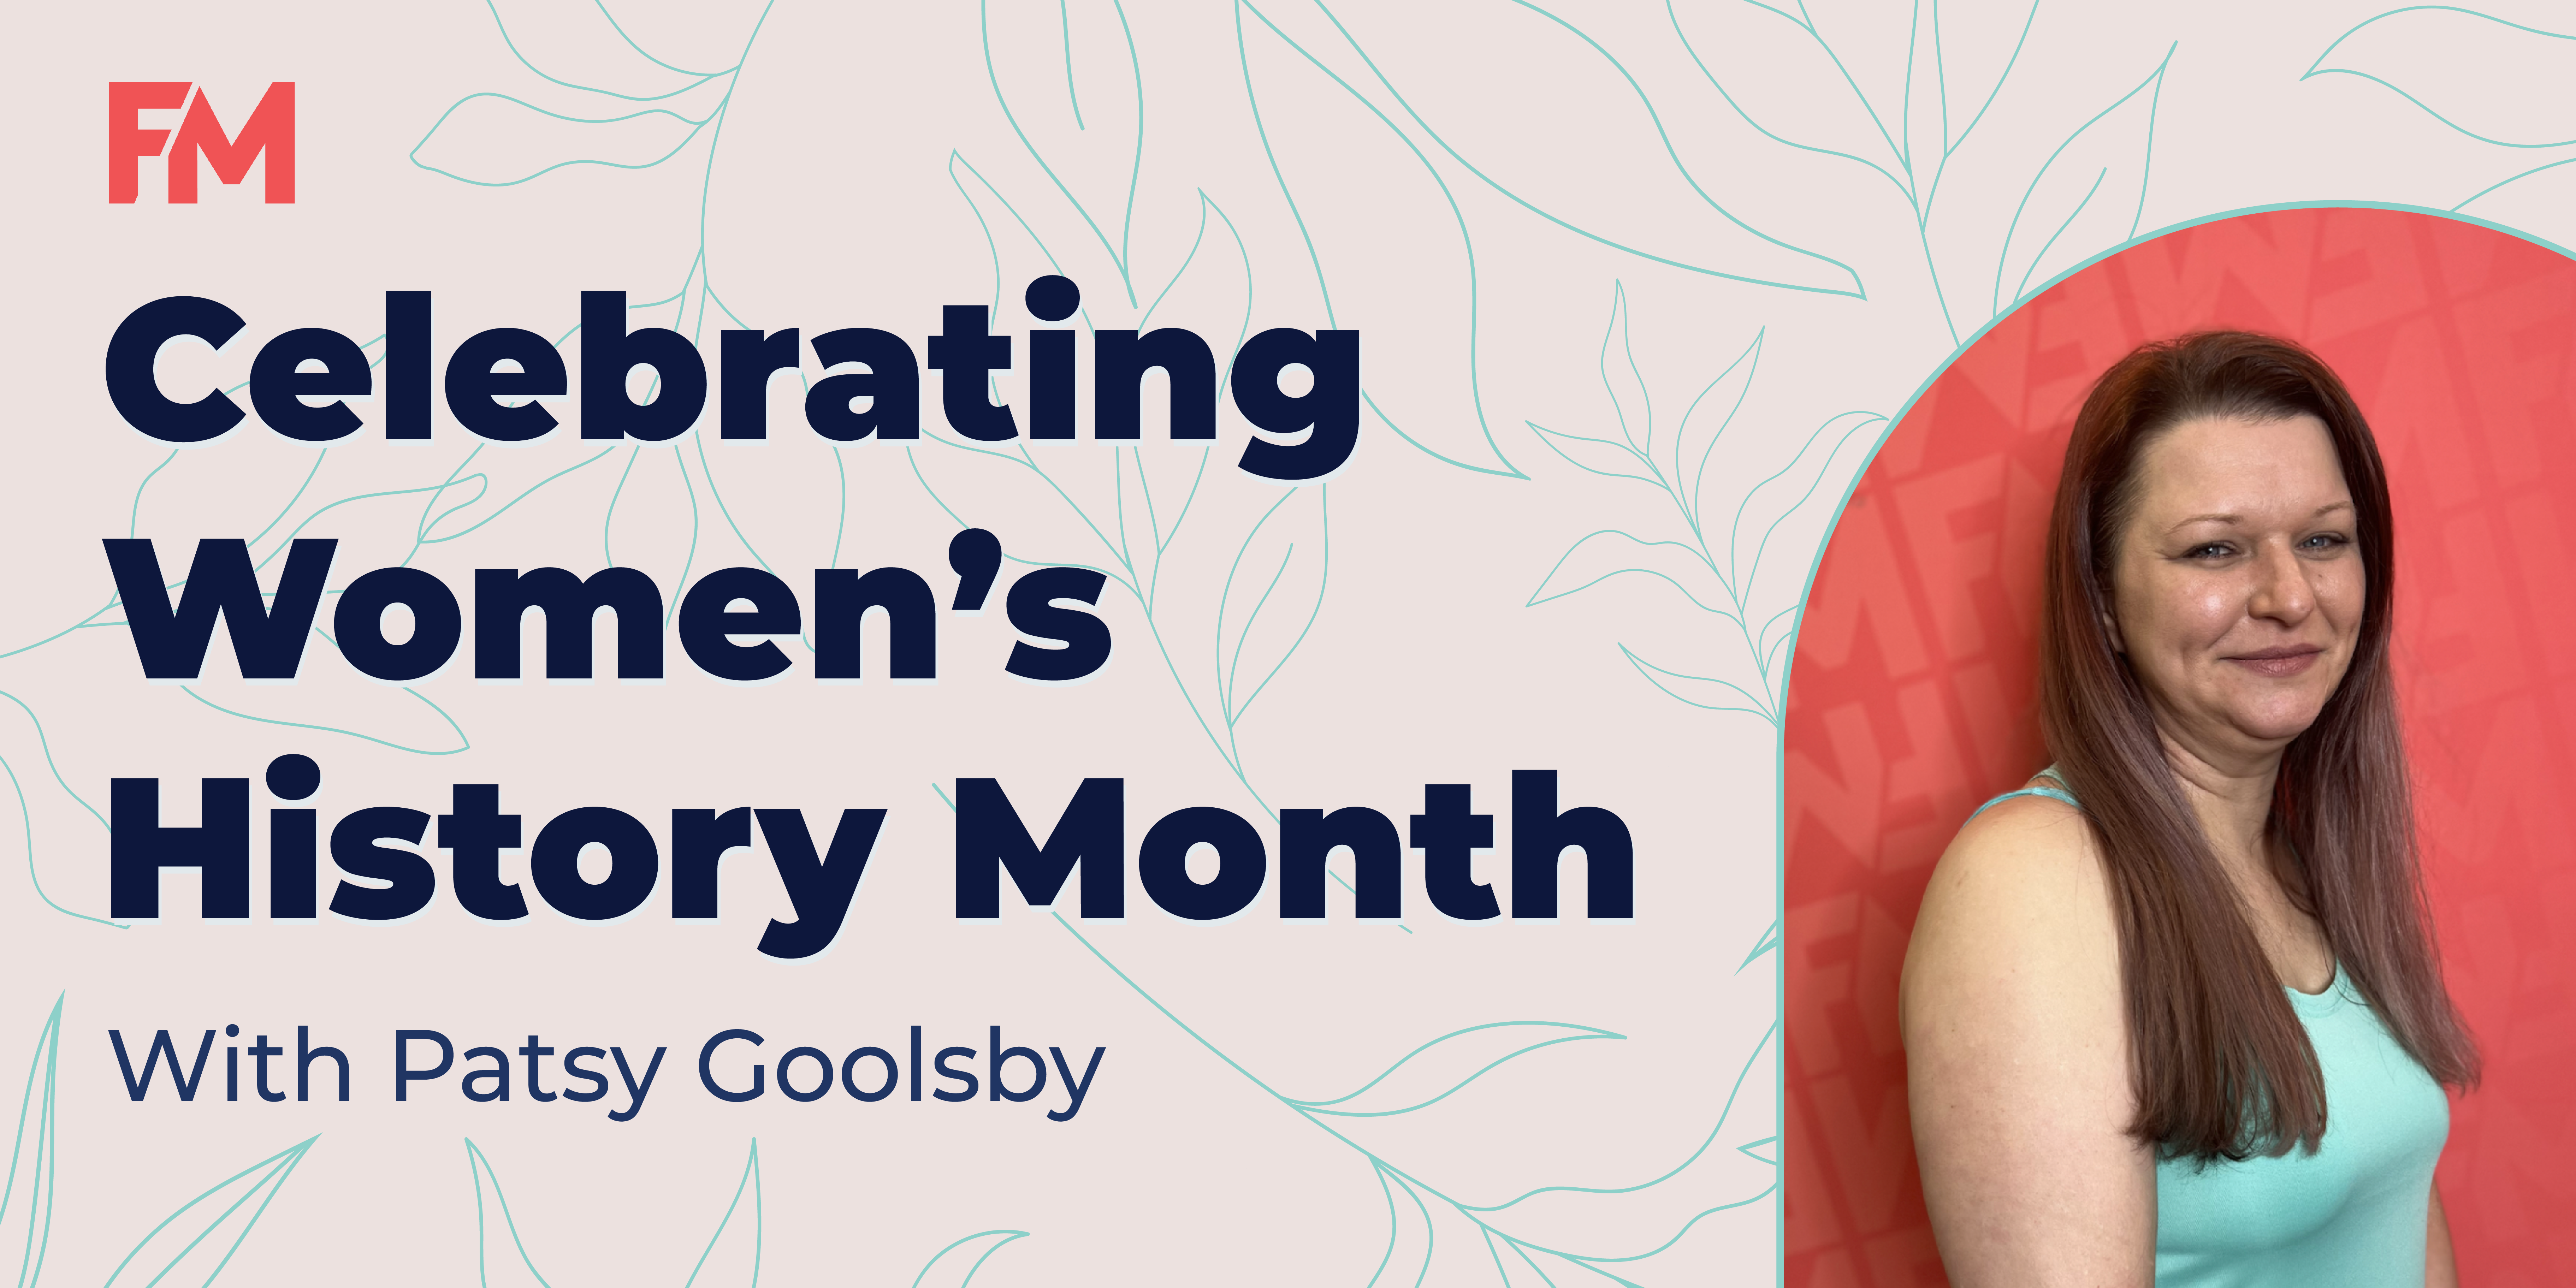 Women's History Month - Patsy Goolsby